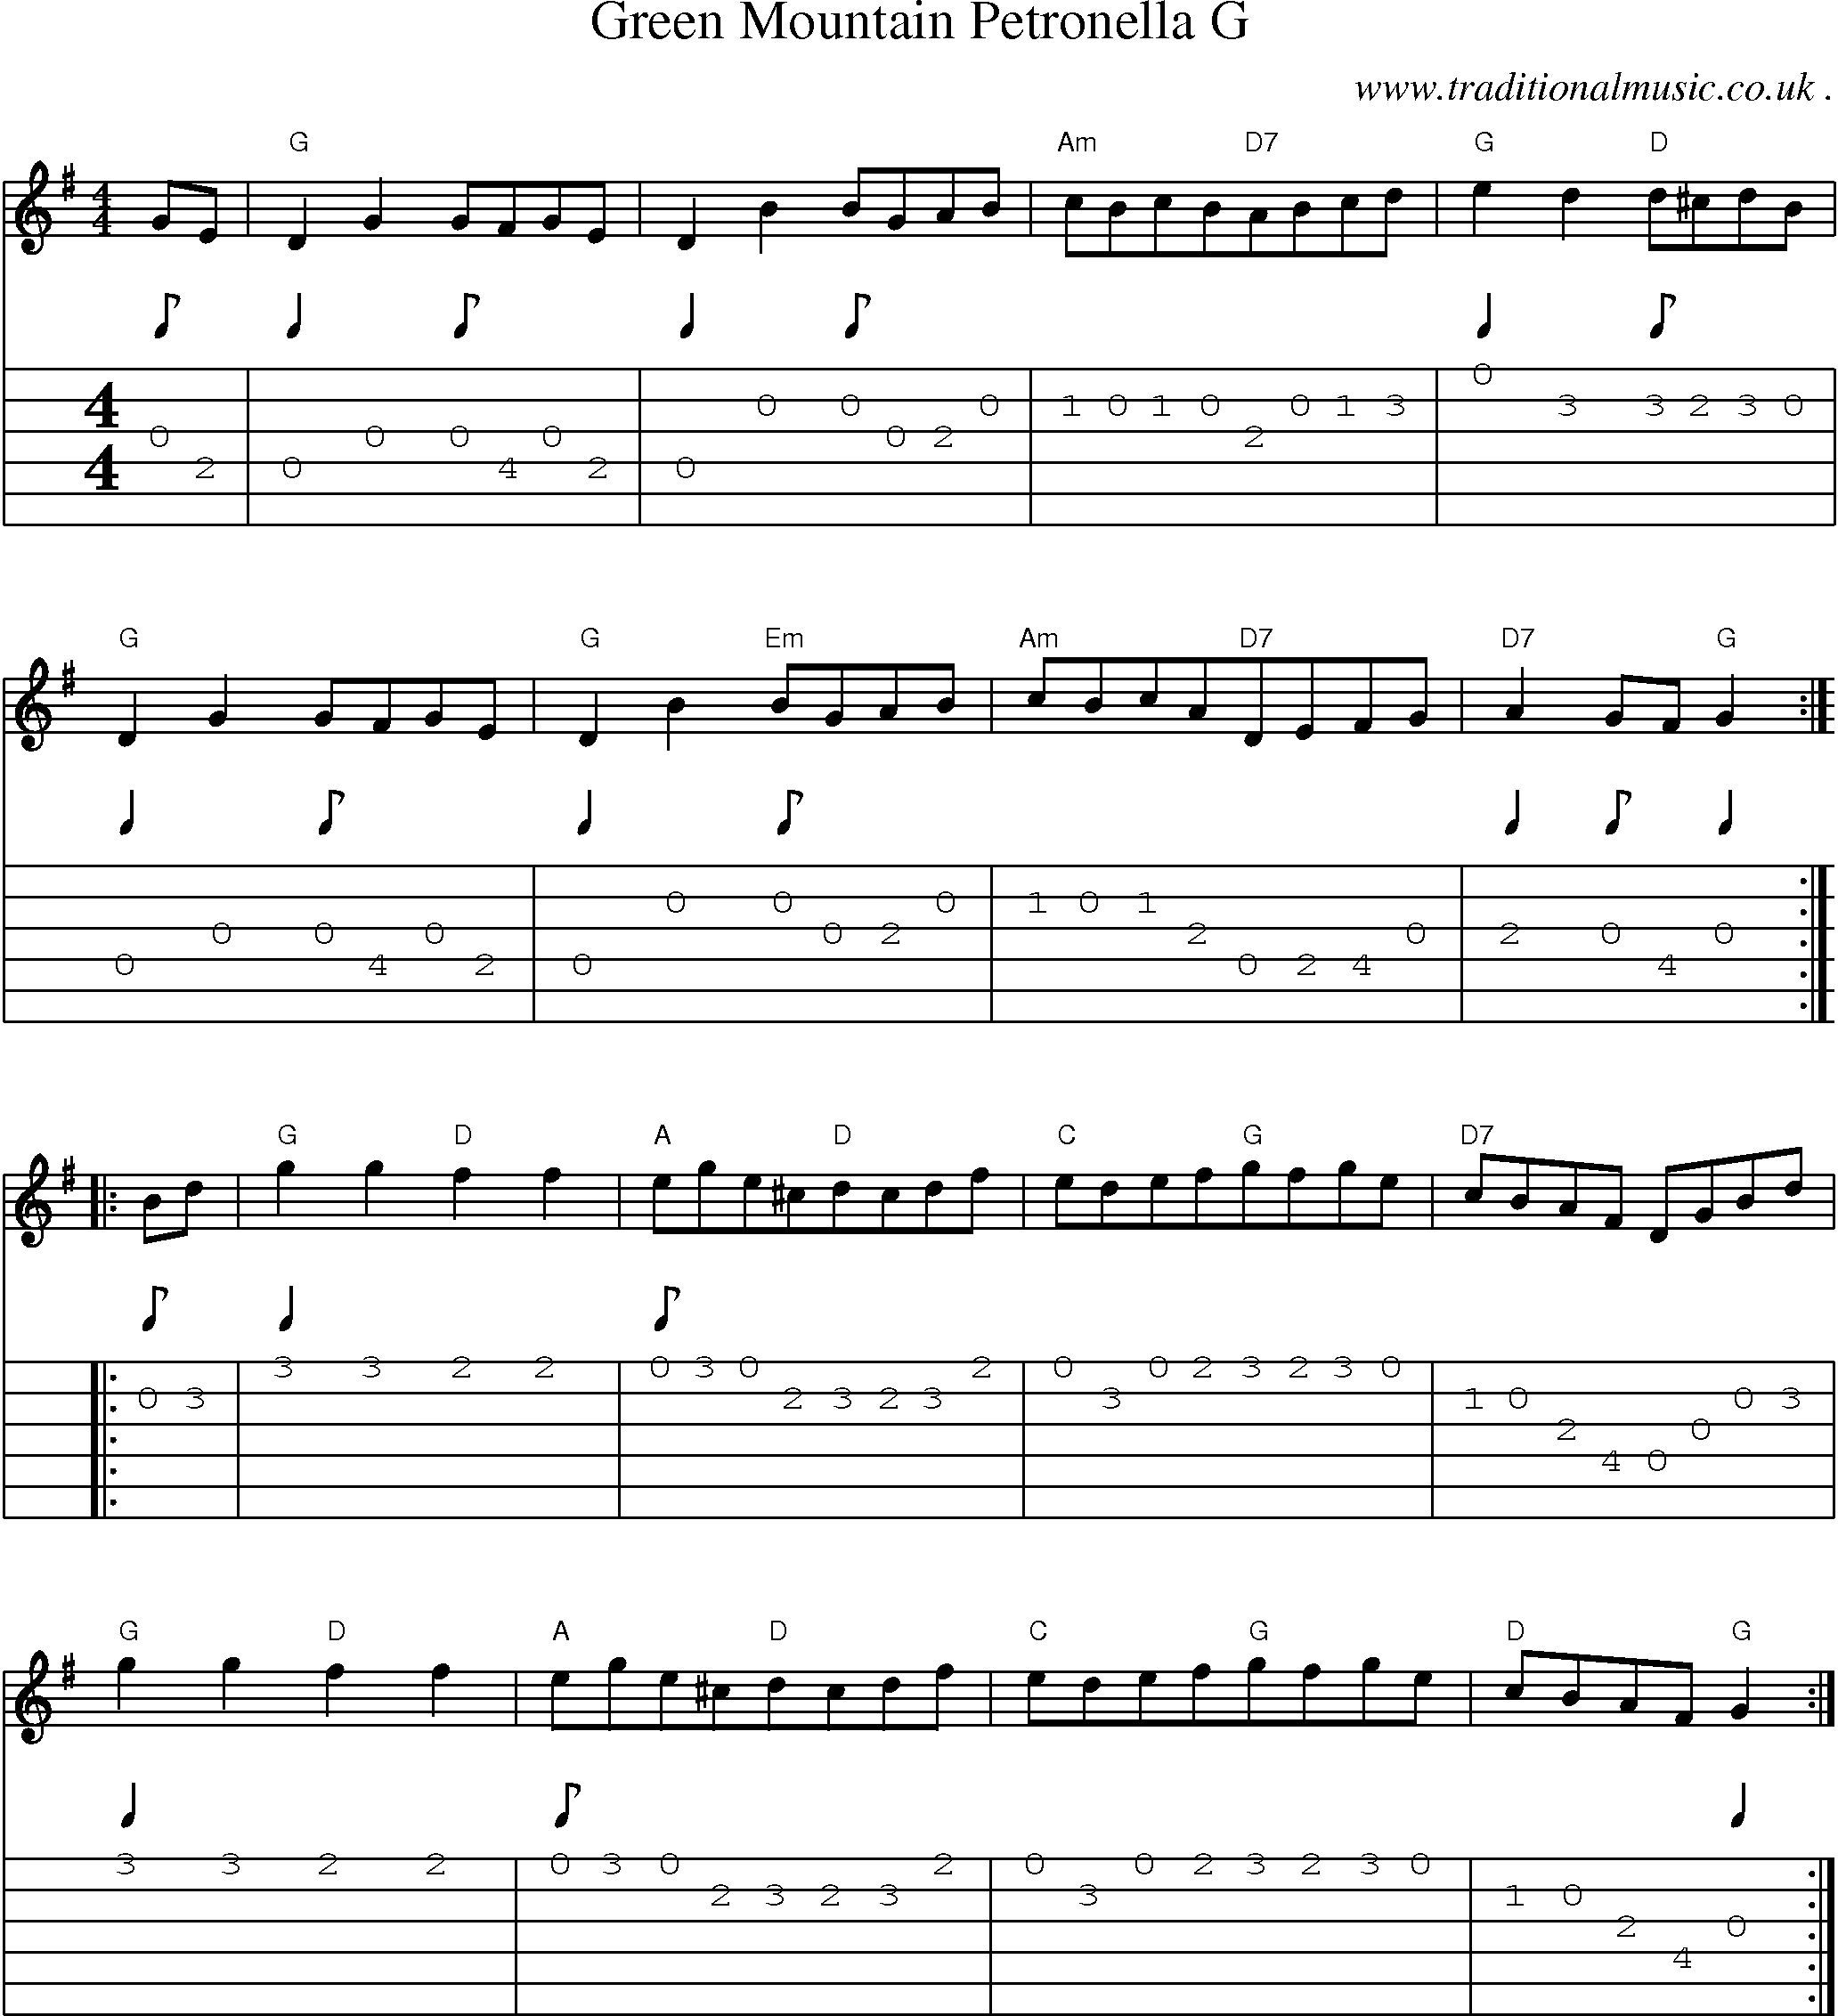 Sheet-Music and Guitar Tabs for Green Mountain Petronella G